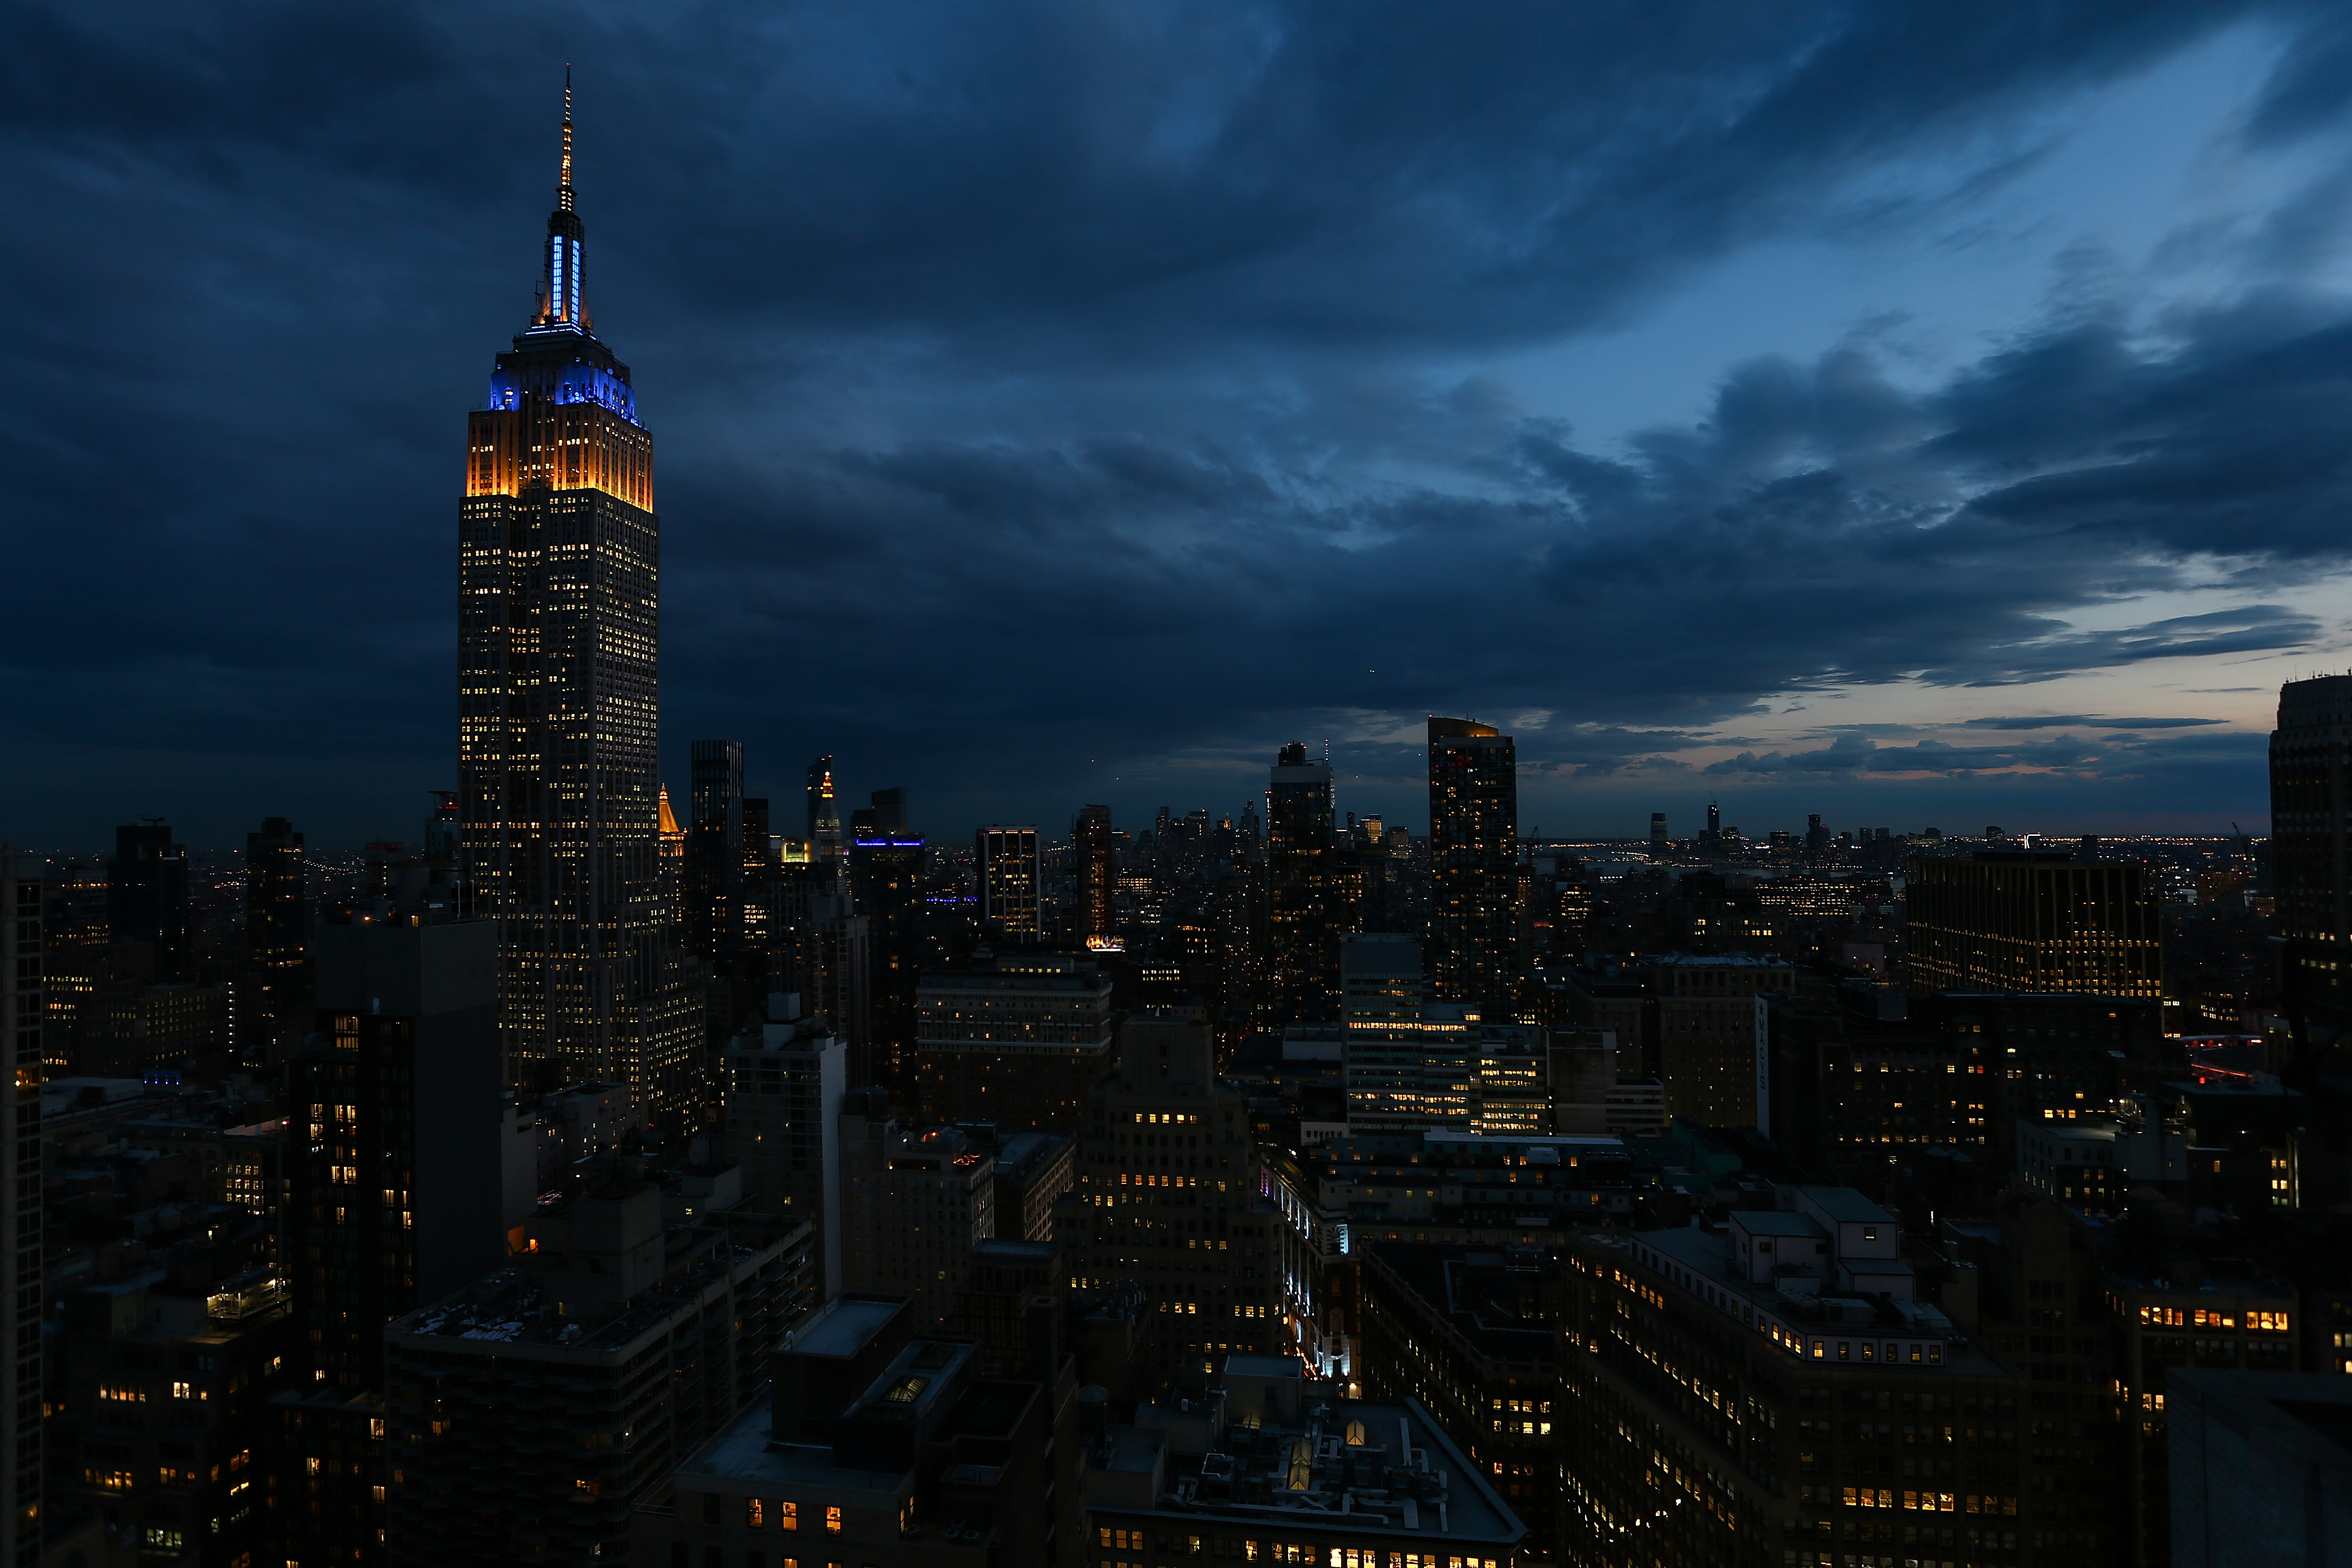 Empire State Building lit up for the PGA Championship